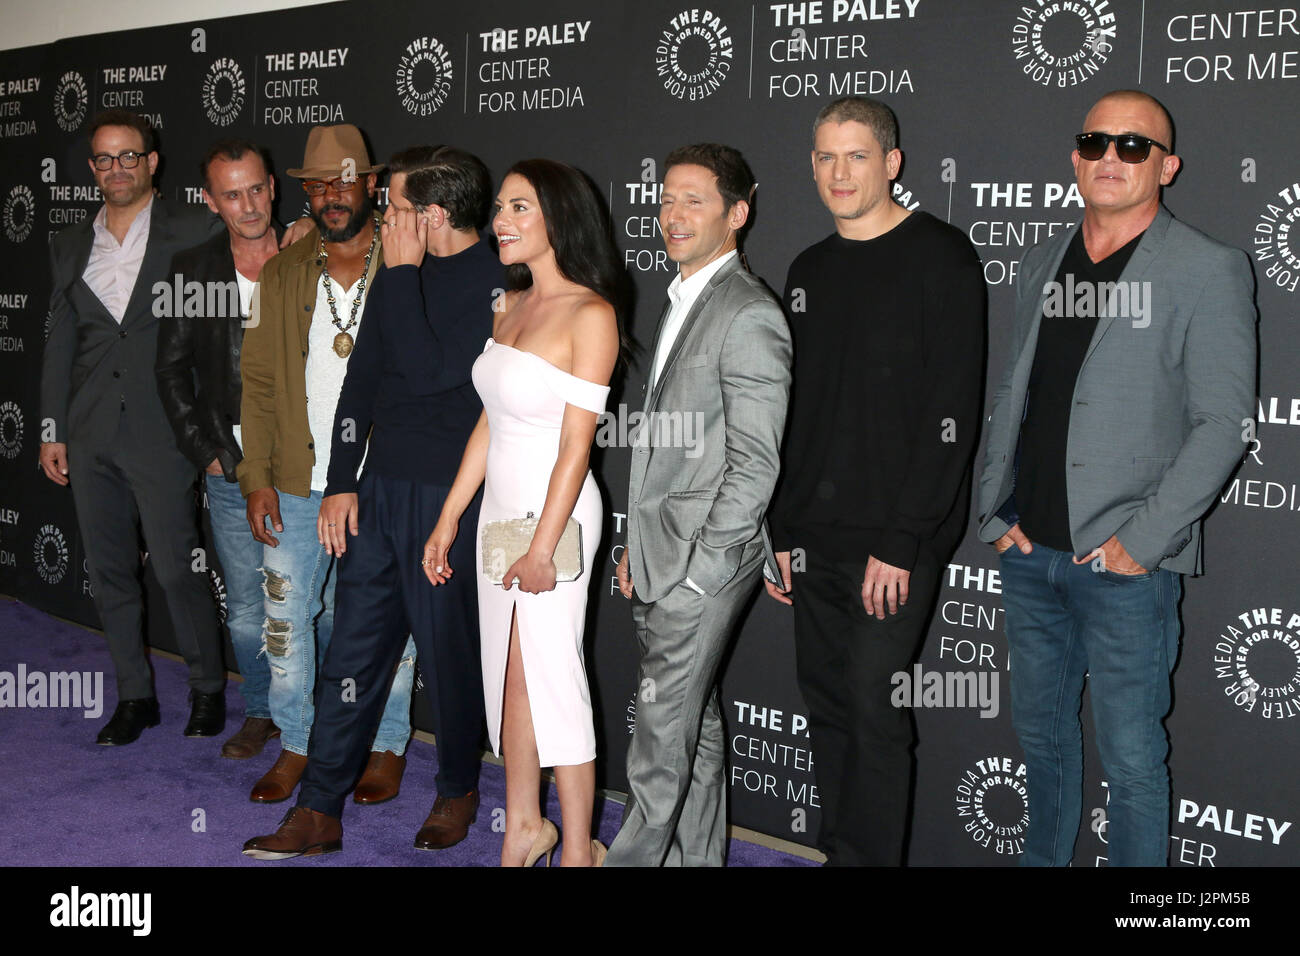 2017 PaleyLive LA Spring Season - 'Prison Break' at the Paley Center for Media - Arrivals  Featuring: Prison Break cast, Dominic Purcel, Wentworth Miller Where: Beverly Hills, California, United States When: 30 Mar 2017 Credit: Nicky Nelson/WENN.com Stock Photo